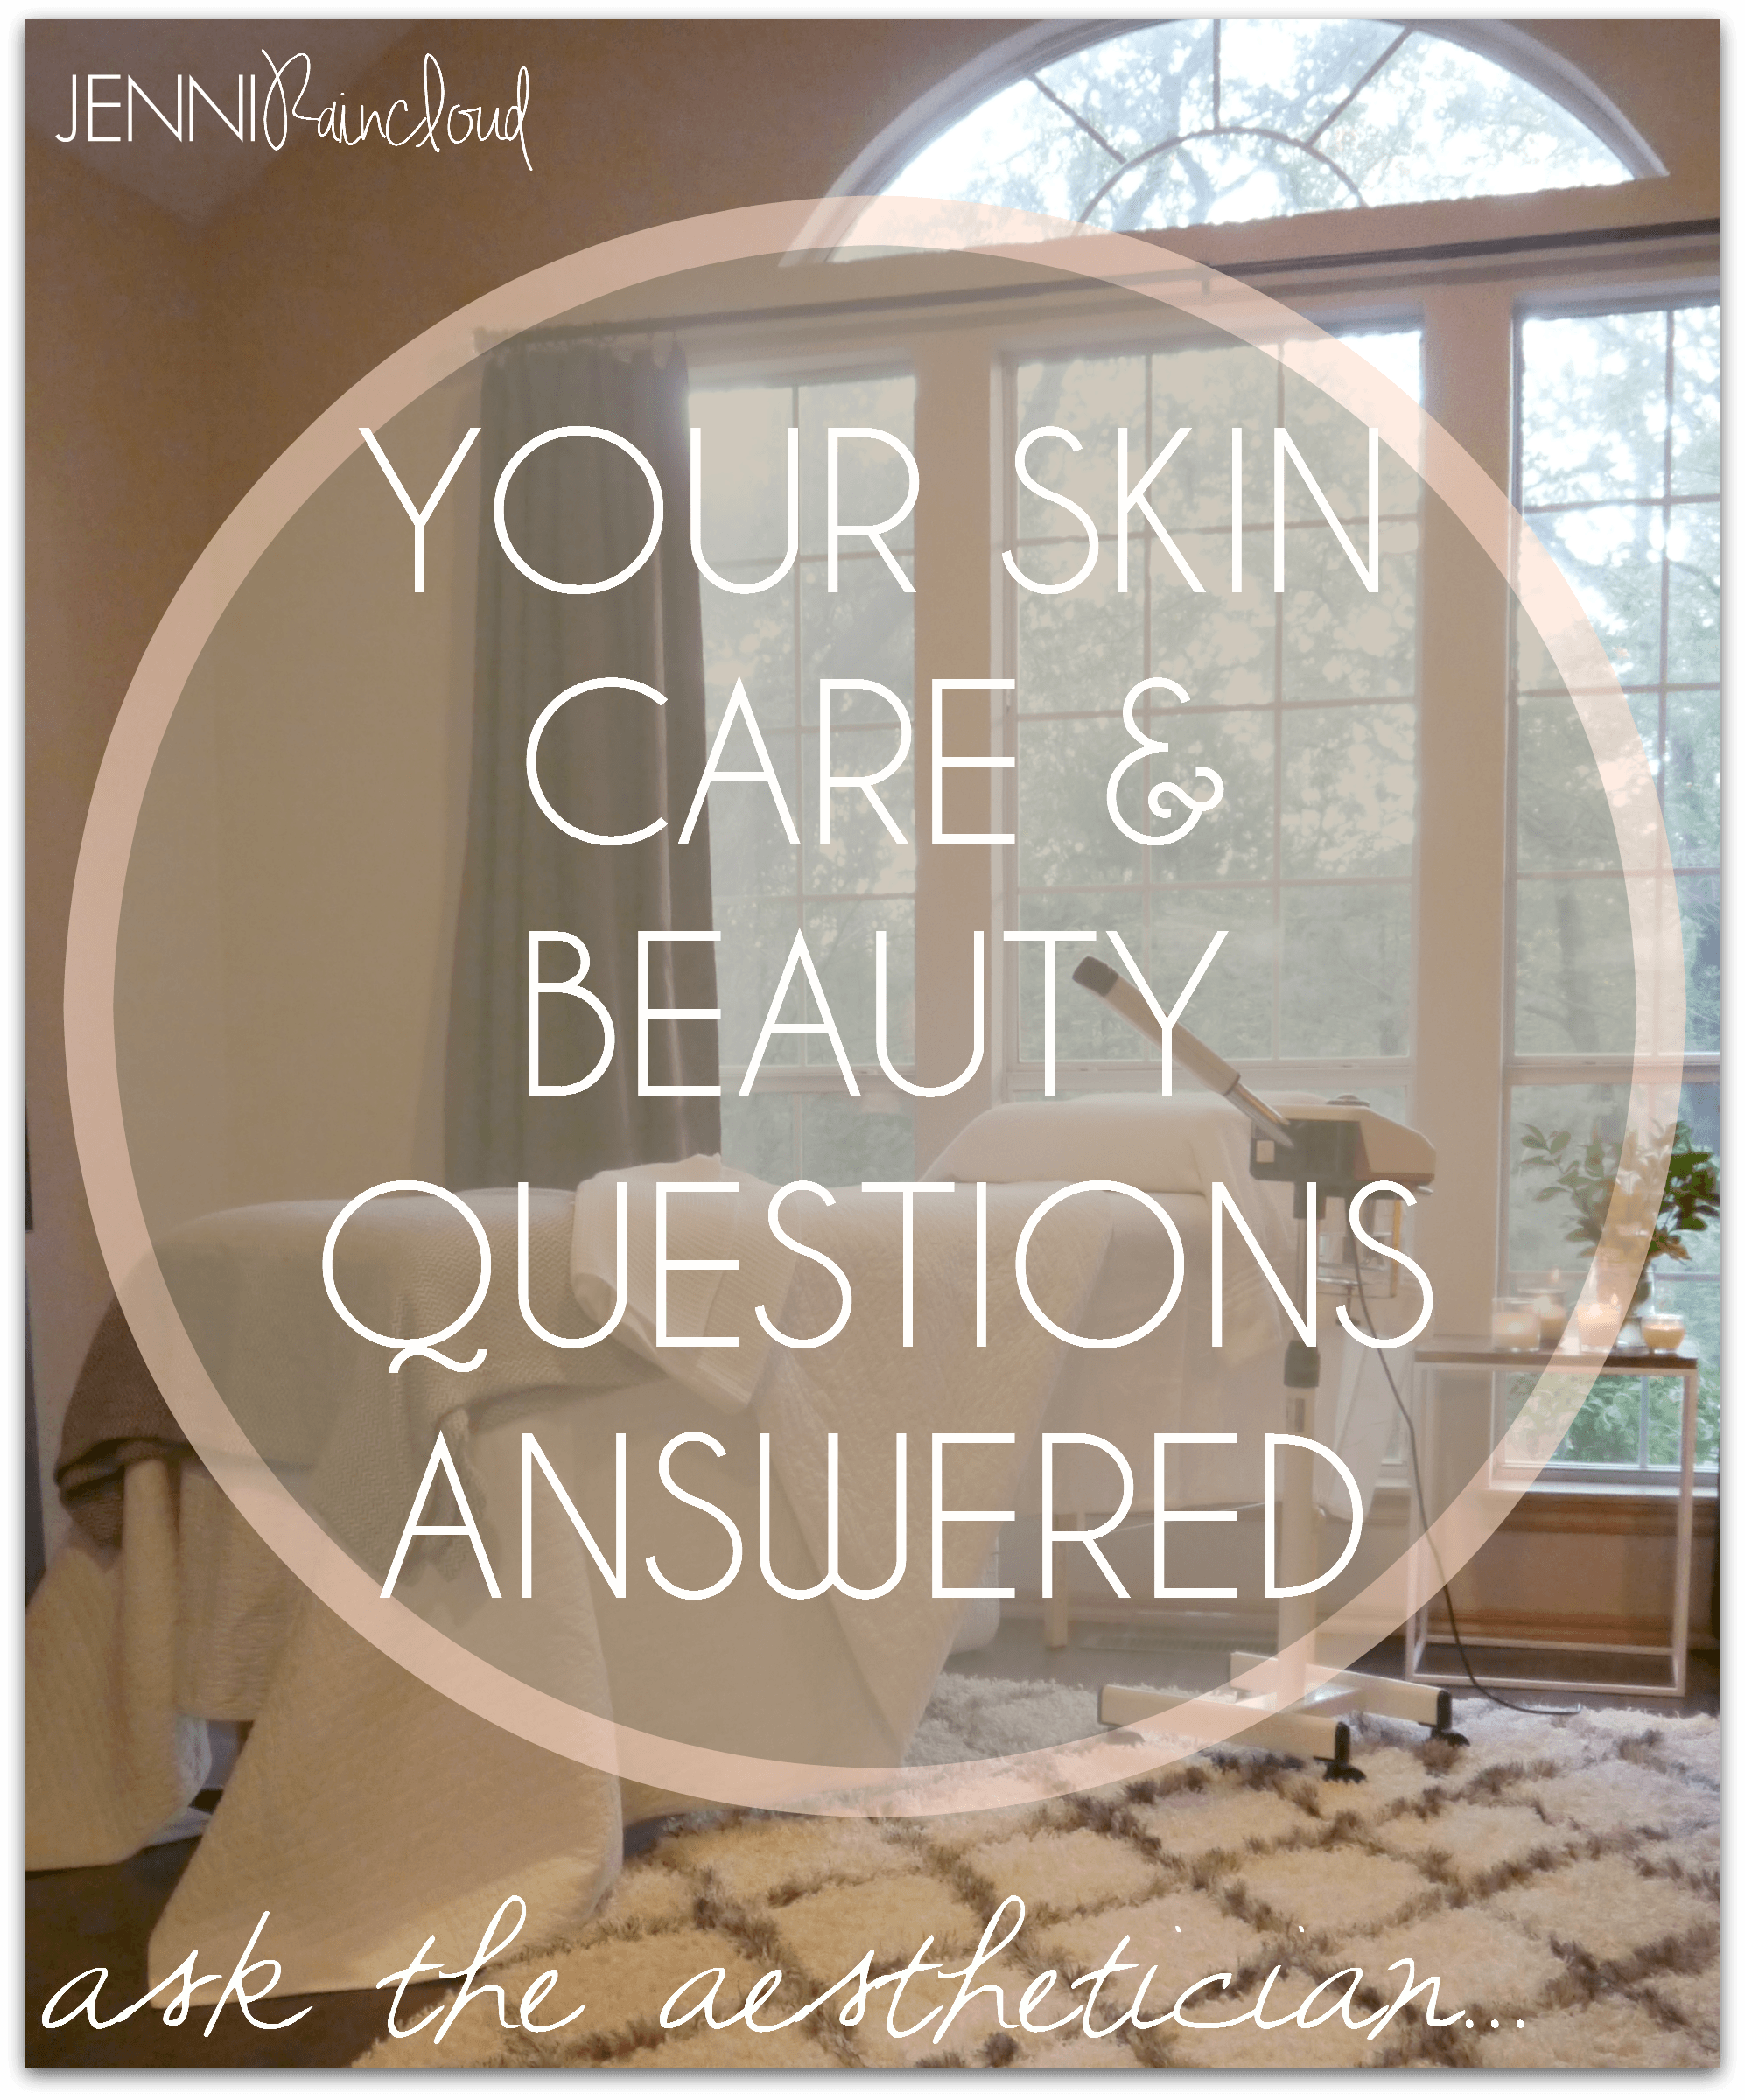 Your skin care questions answered